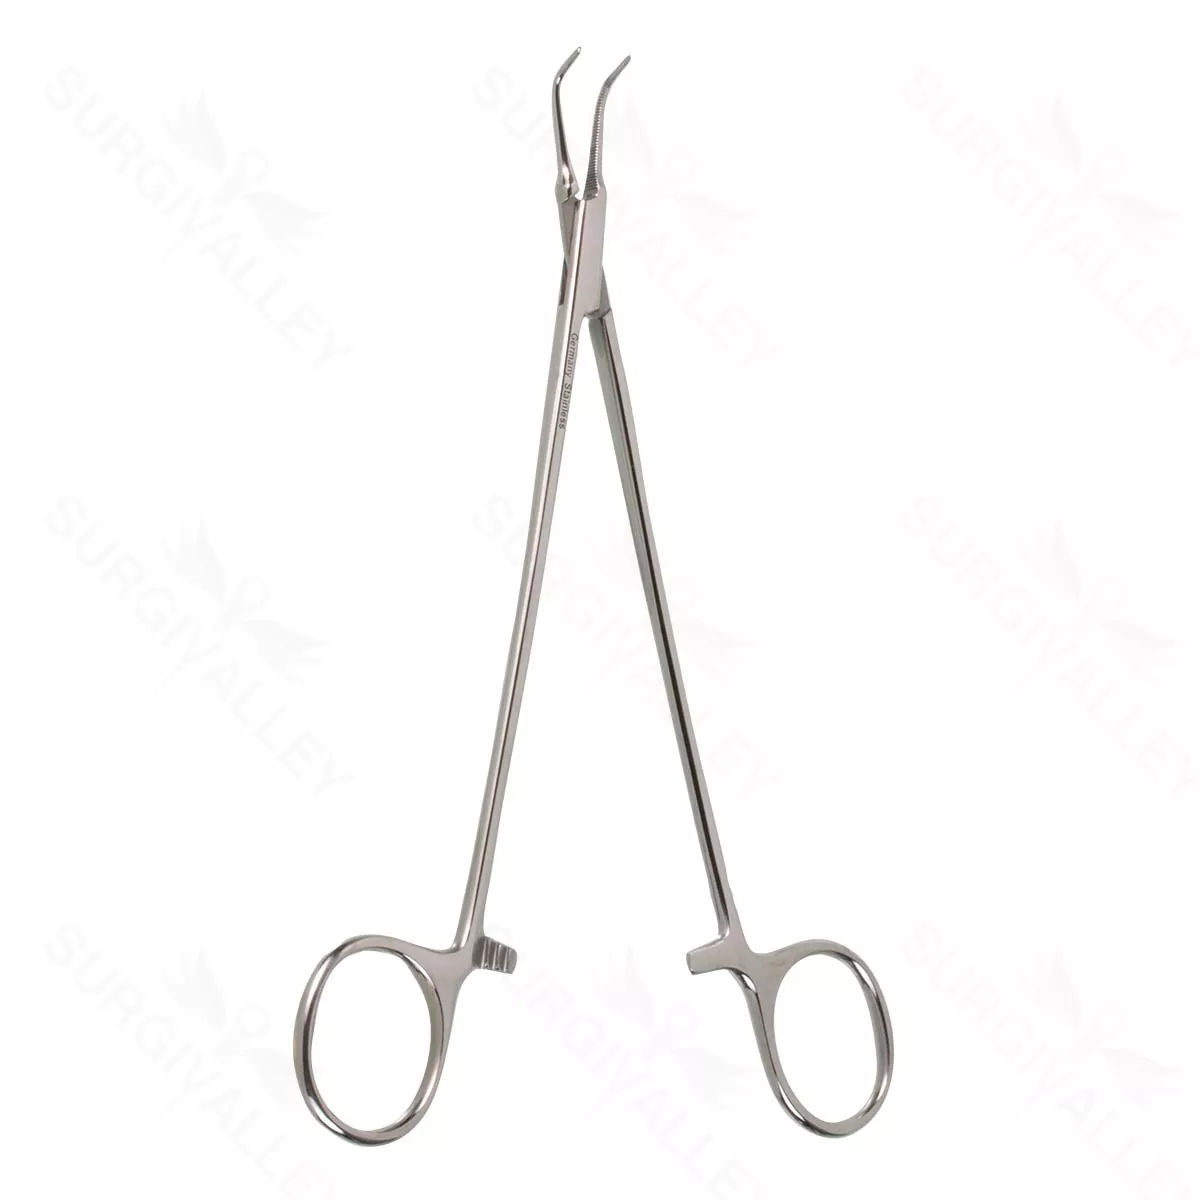 7″ Bailey Forceps – Very Fine Jaw ang 60°